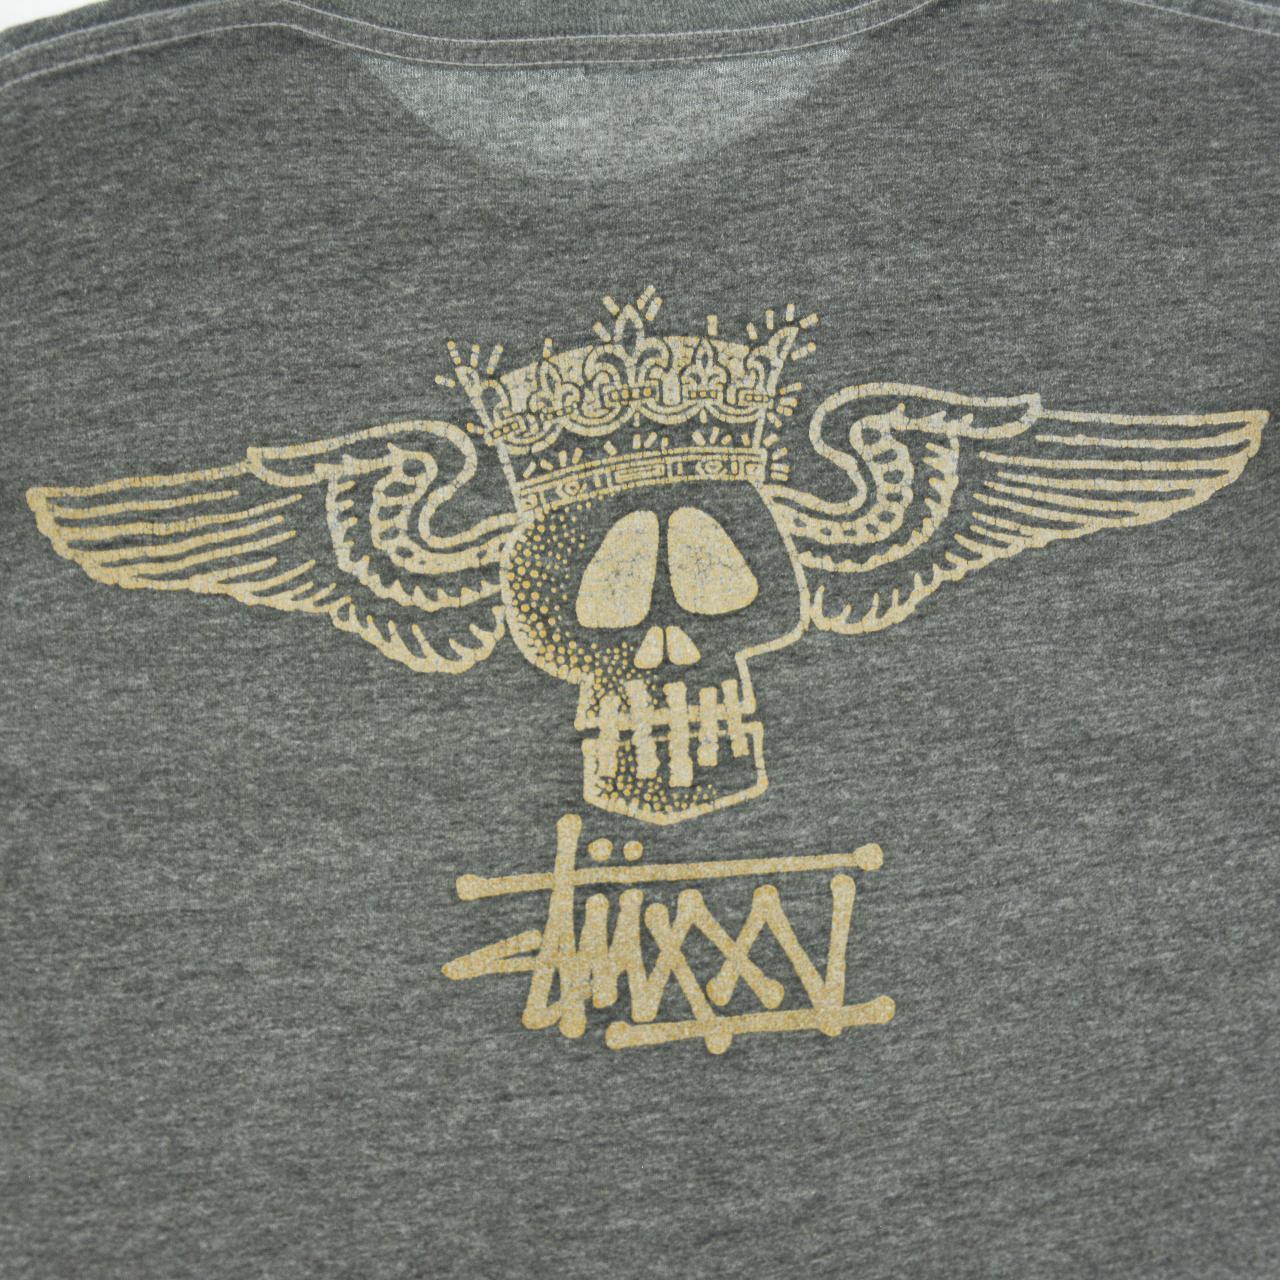 Vintage Stussy Wings T Shirt Size M - Known Source